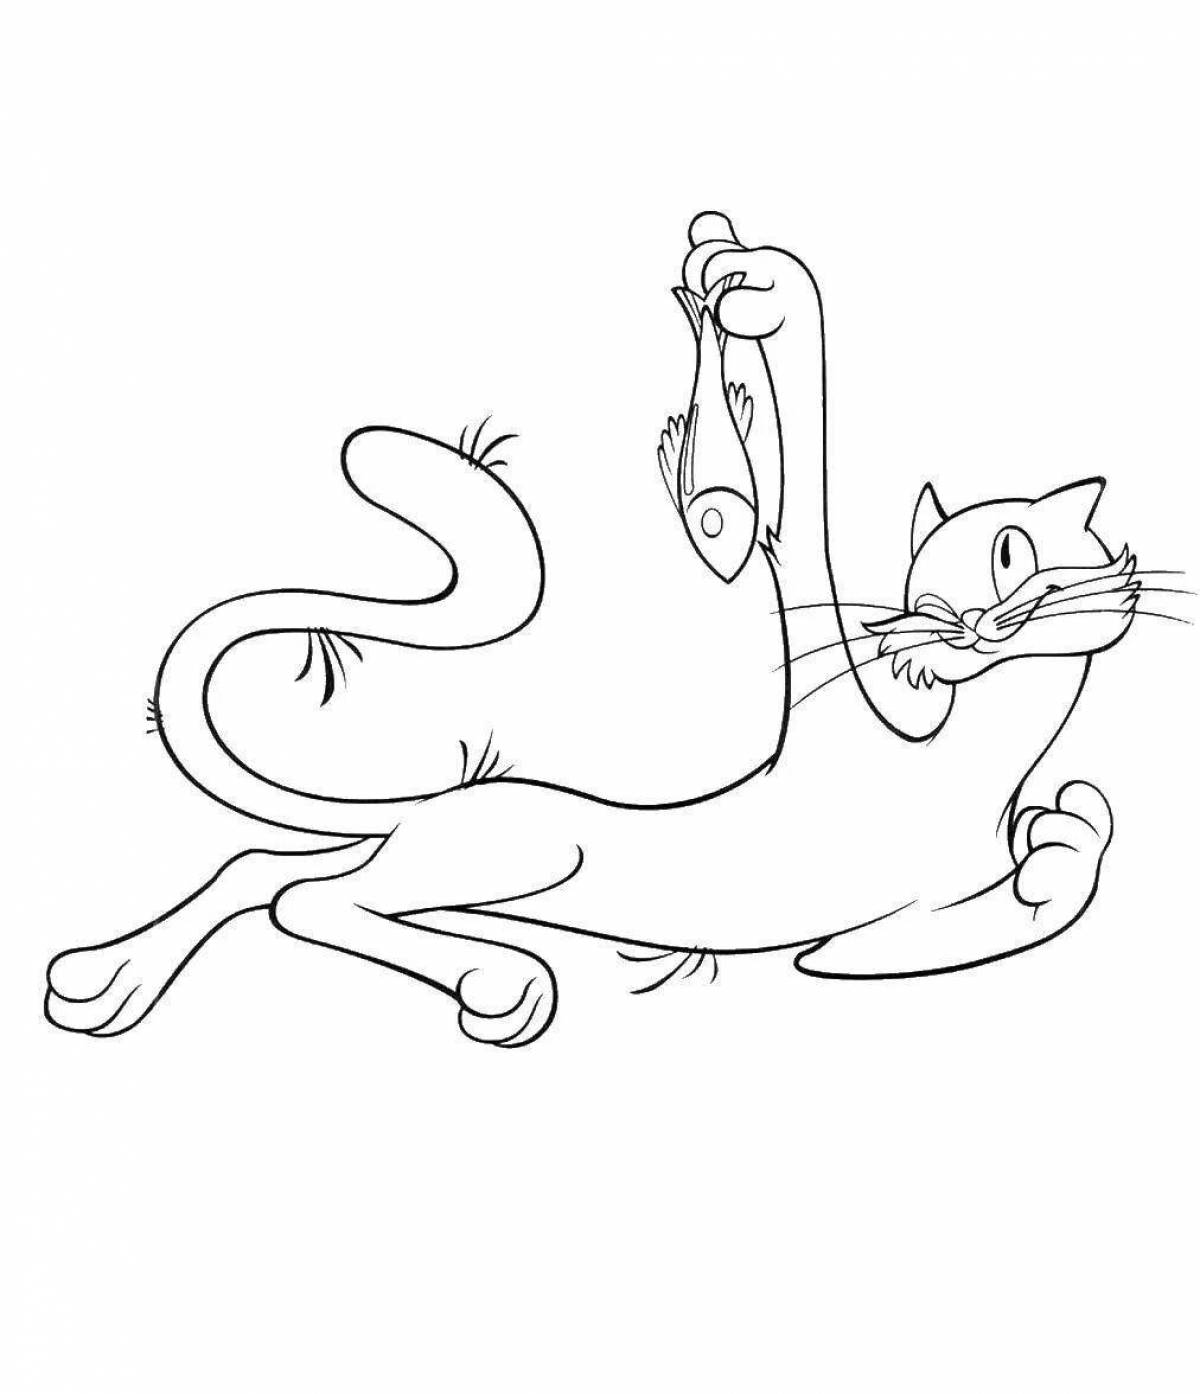 Colorful cat sausage coloring page